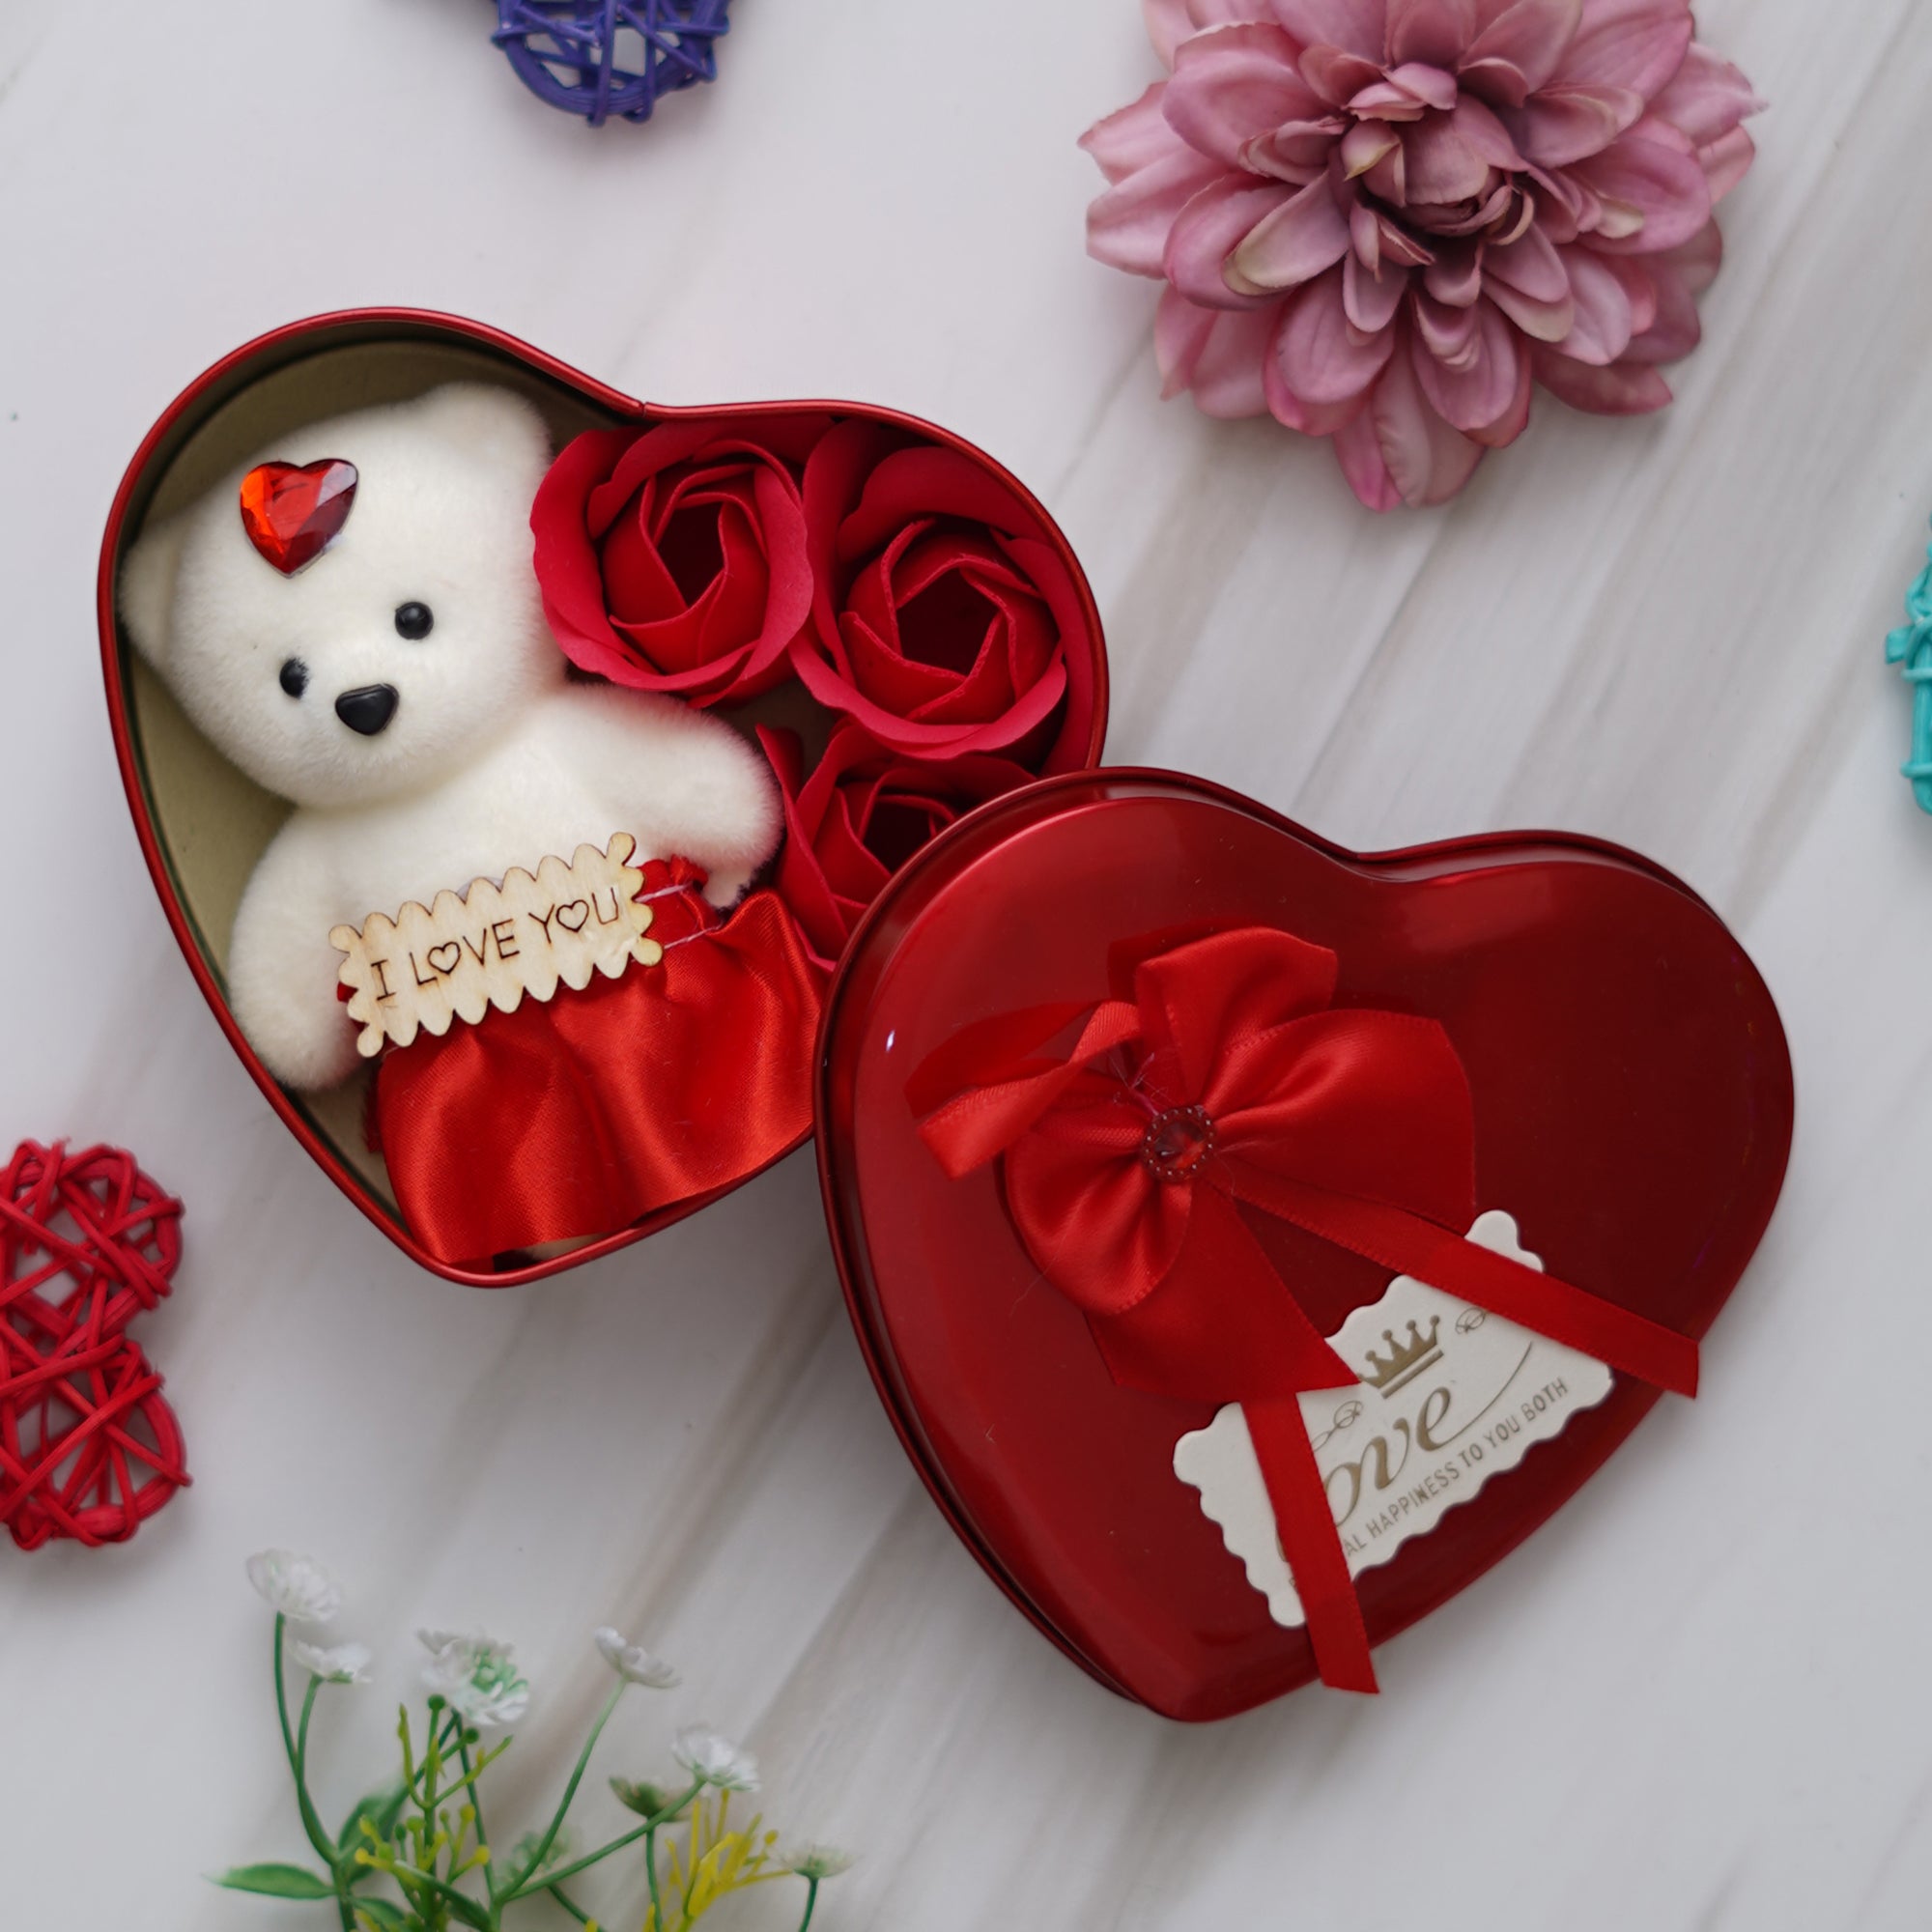 Valentine Combo of Golden Red Rose Gift Set, "Love You" Wooden Showpiece With Stand, Heart Shaped Gift Box Set with White Teddy and Red Roses 5